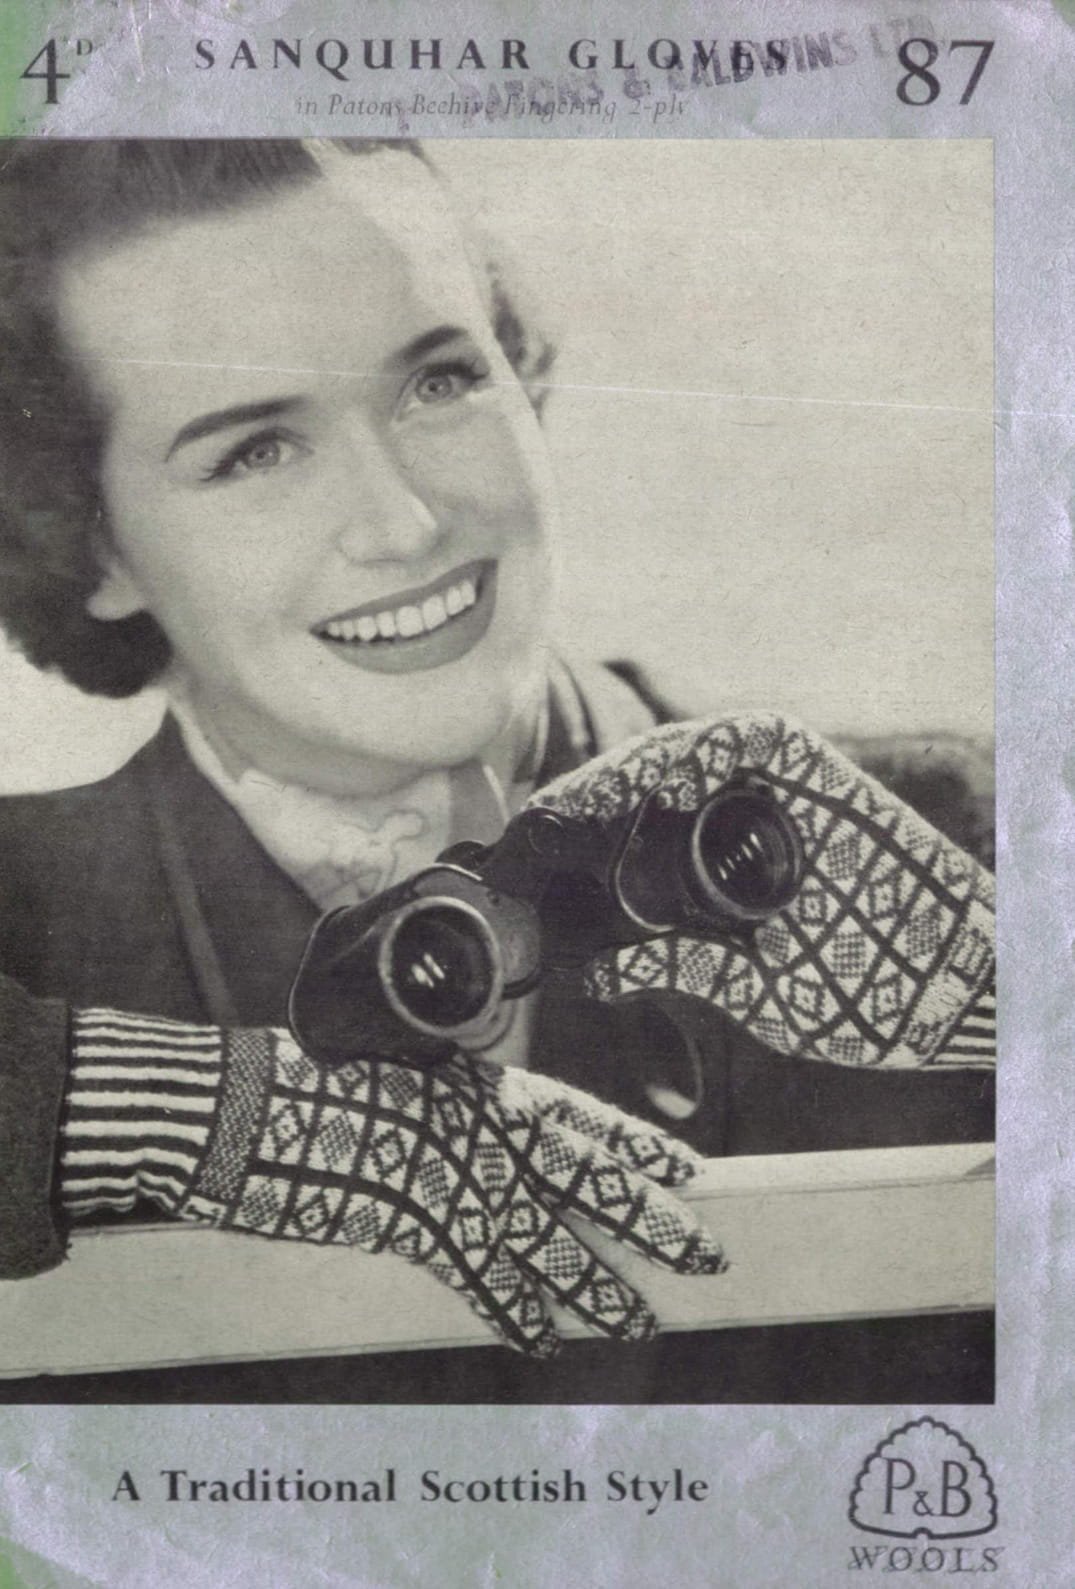 Cover of P&B leaflet 89 "Sauquhar Gloves". Lady holding binoculars wearing a pair of Sanqhuar design gloves